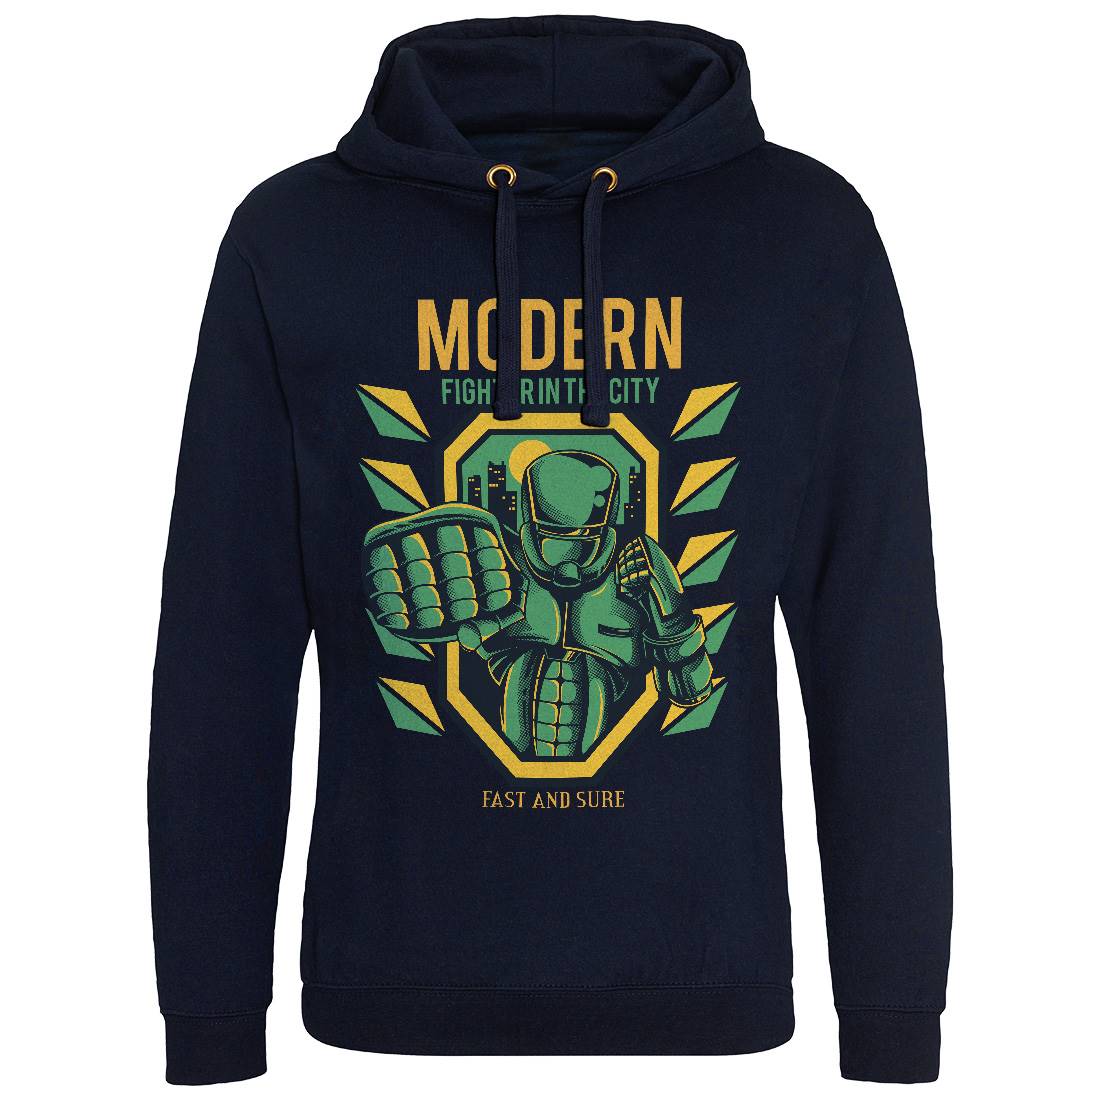 Modern Fighter Mens Hoodie Without Pocket Army D656